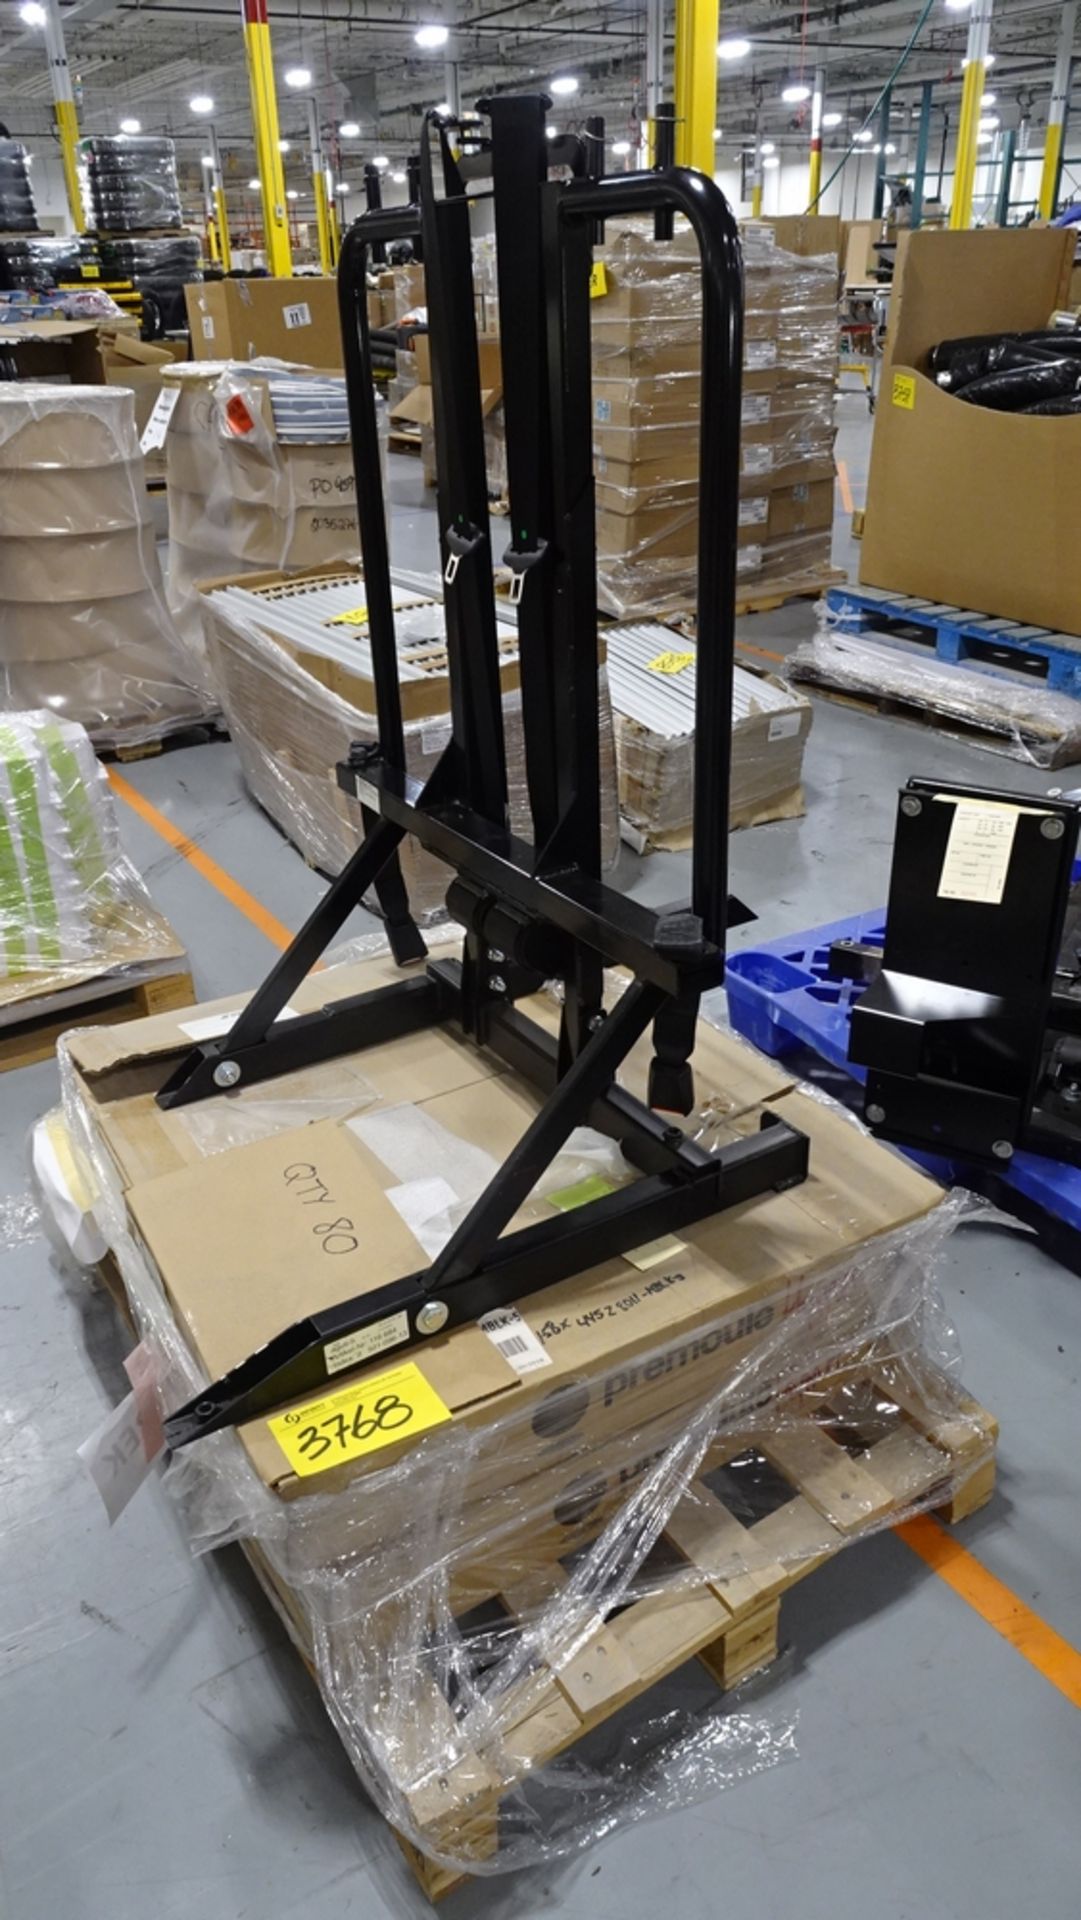 PALLET SEATBELT ASSEMBLY AND WOOD COMPONENTS (REUTER)